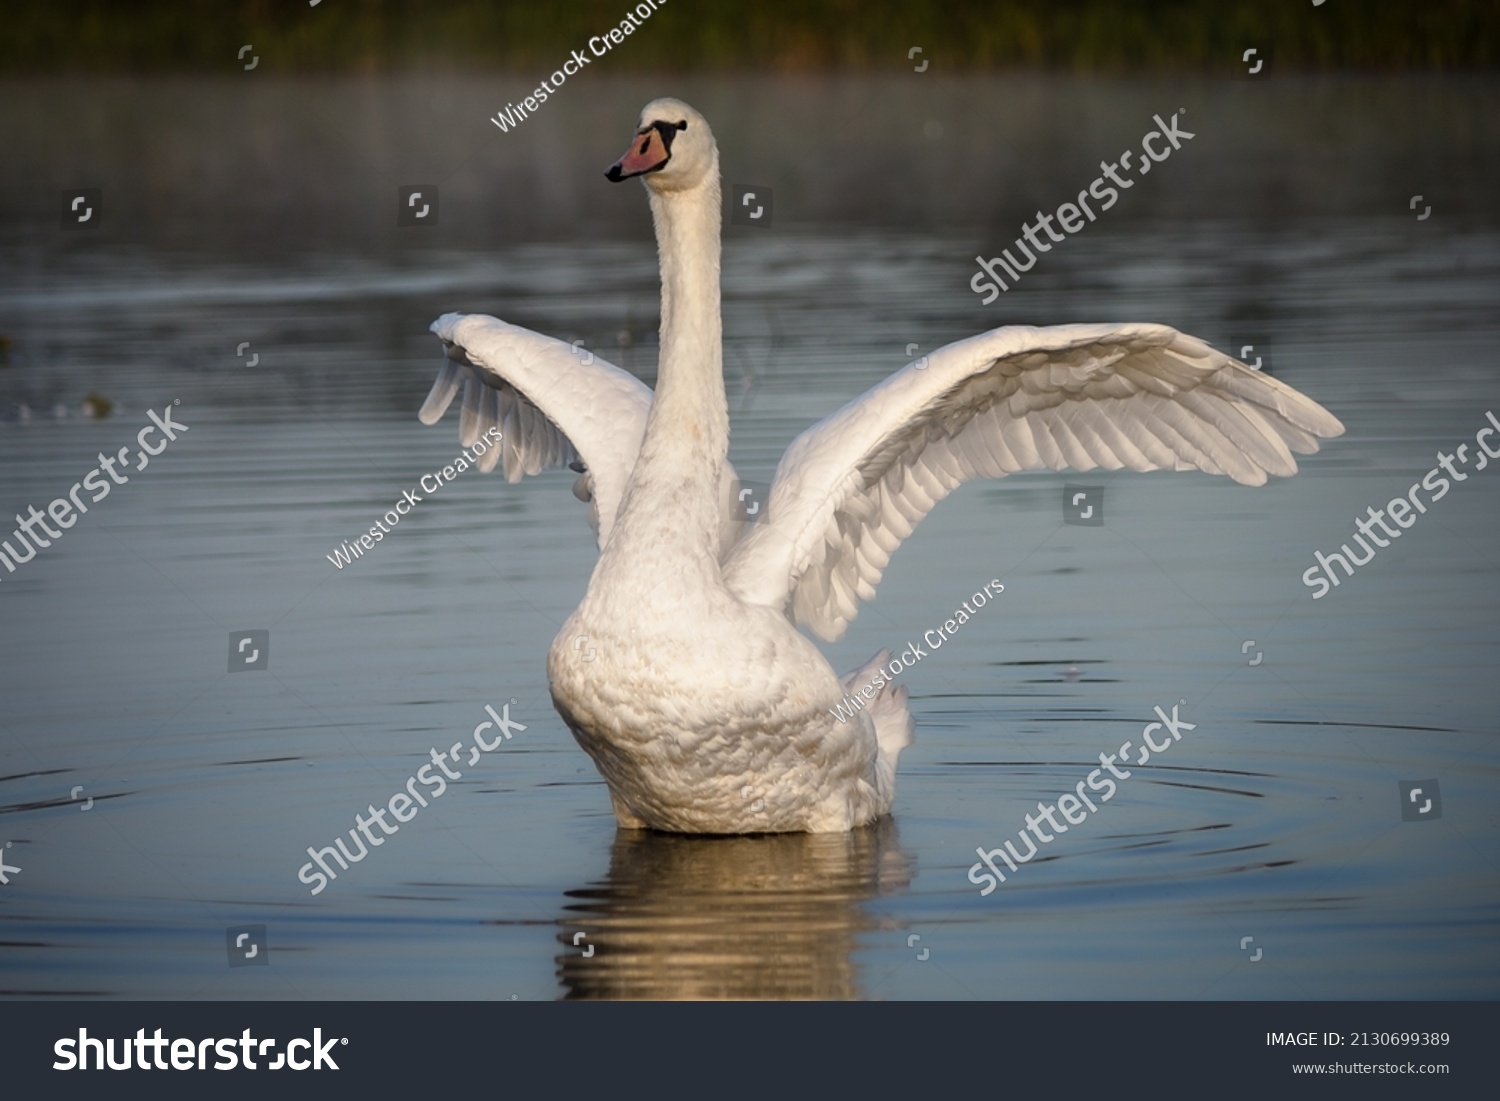 A selective focus of a beautiful white swan with its wings open swimming in a lake #2130699389